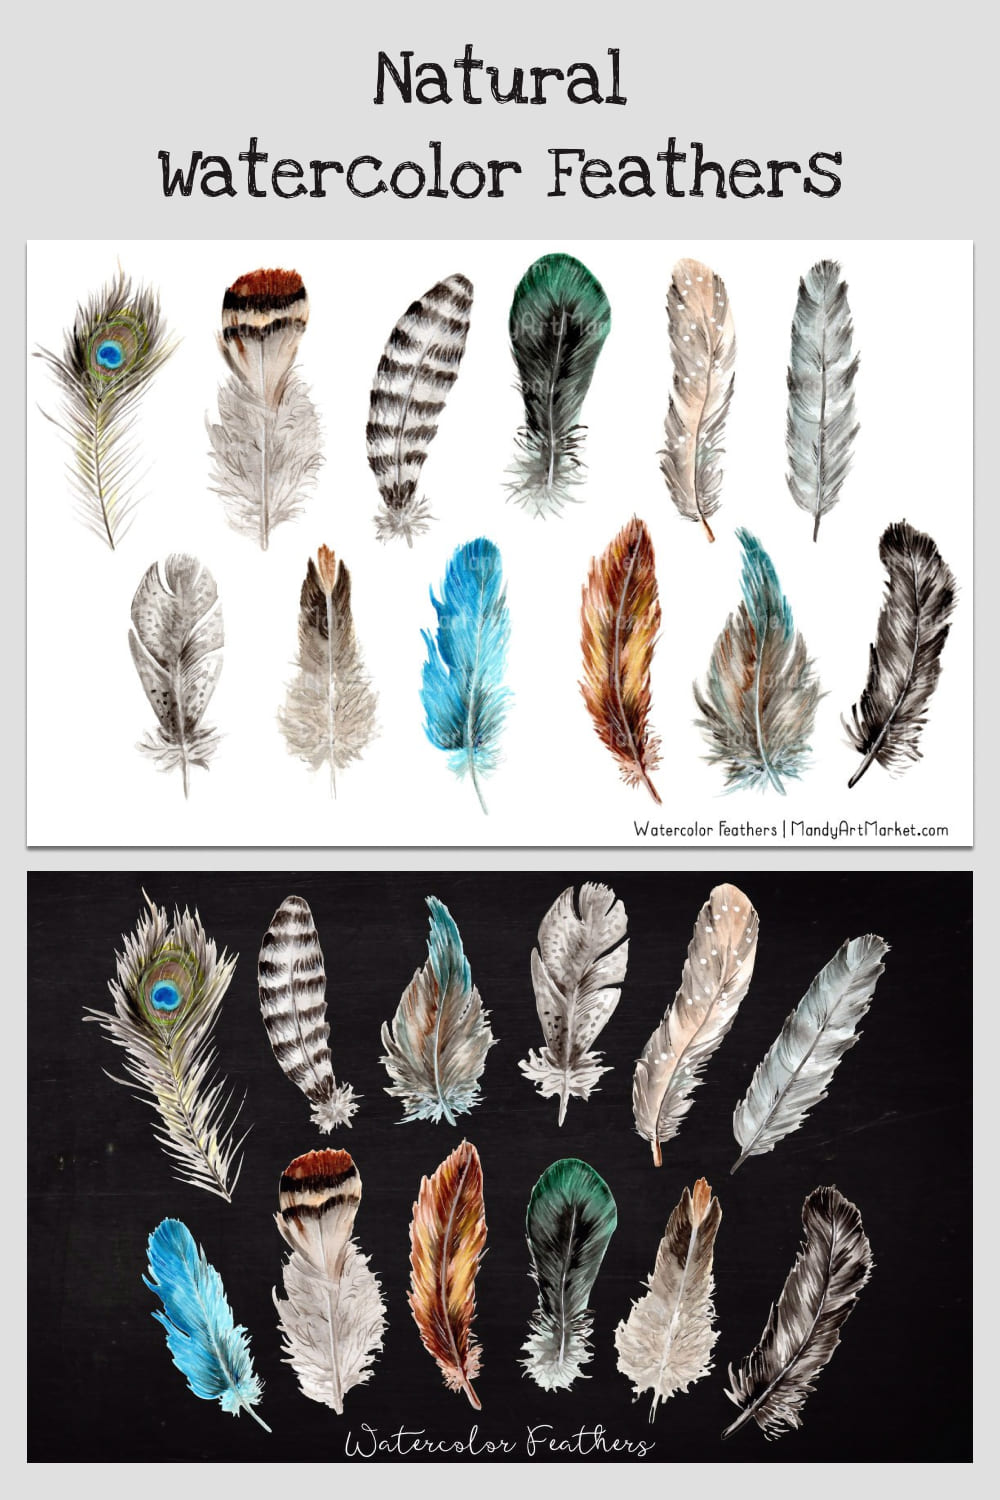 Natural Watercolor Feathers Collection pinterest image.